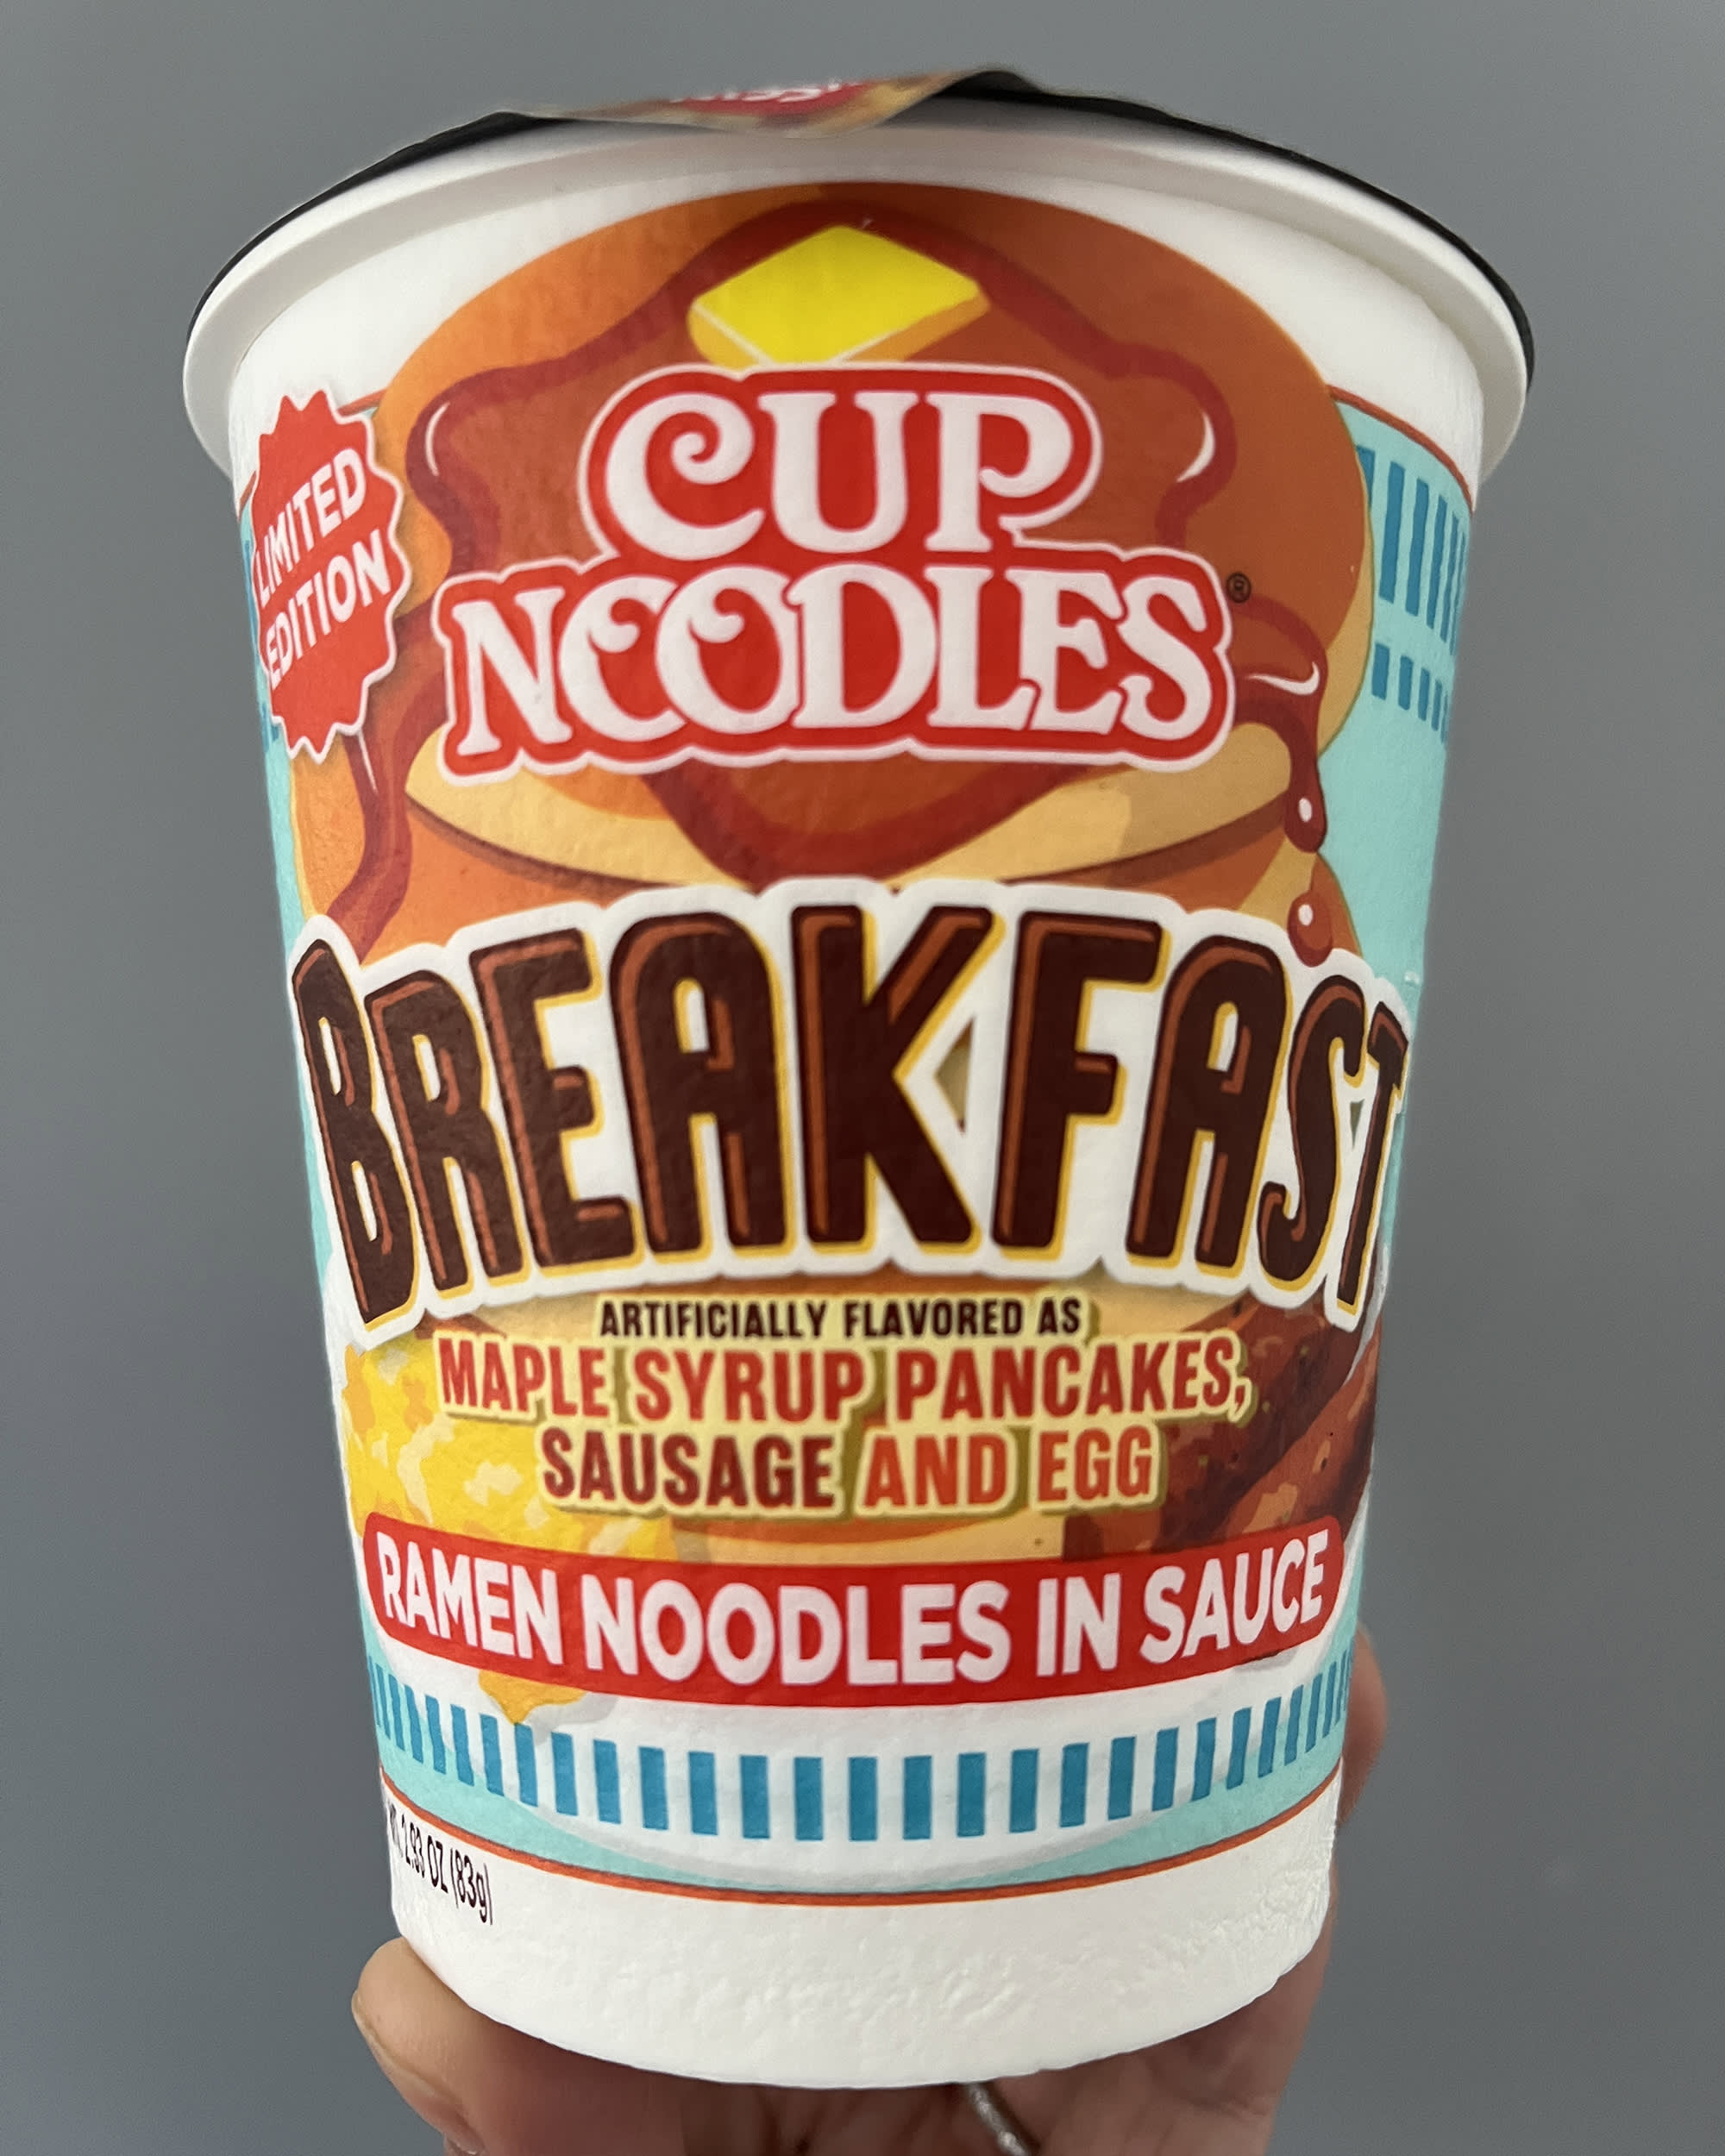 I Tried Cup Noodle's Limited-Edition Breakfast Flavor — Here's What I Think